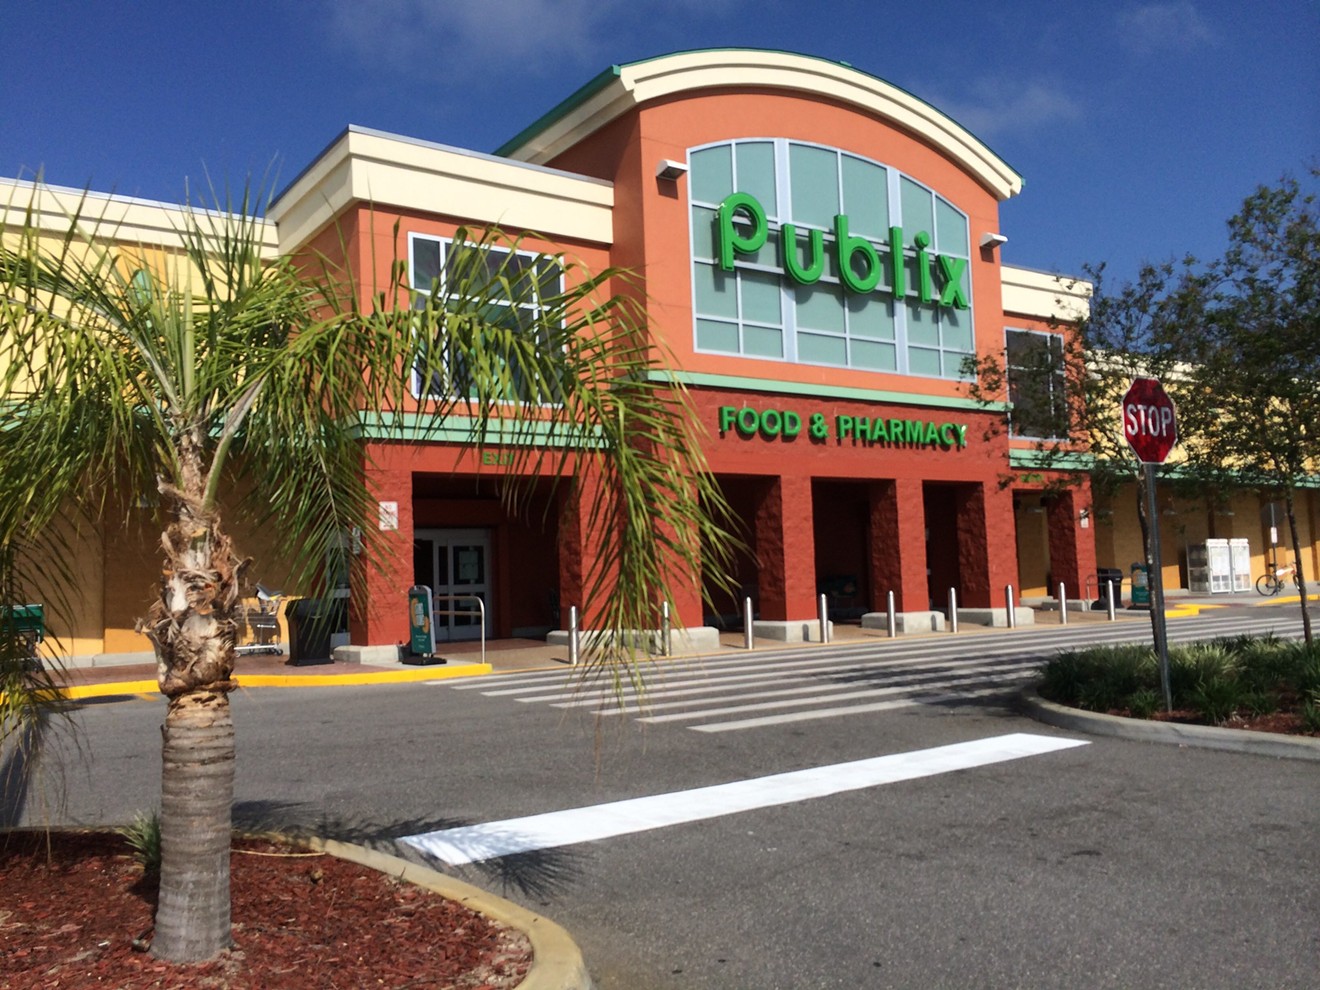 Starting this week, you can get vaccinated at a Publix pharmacy without an appointment.